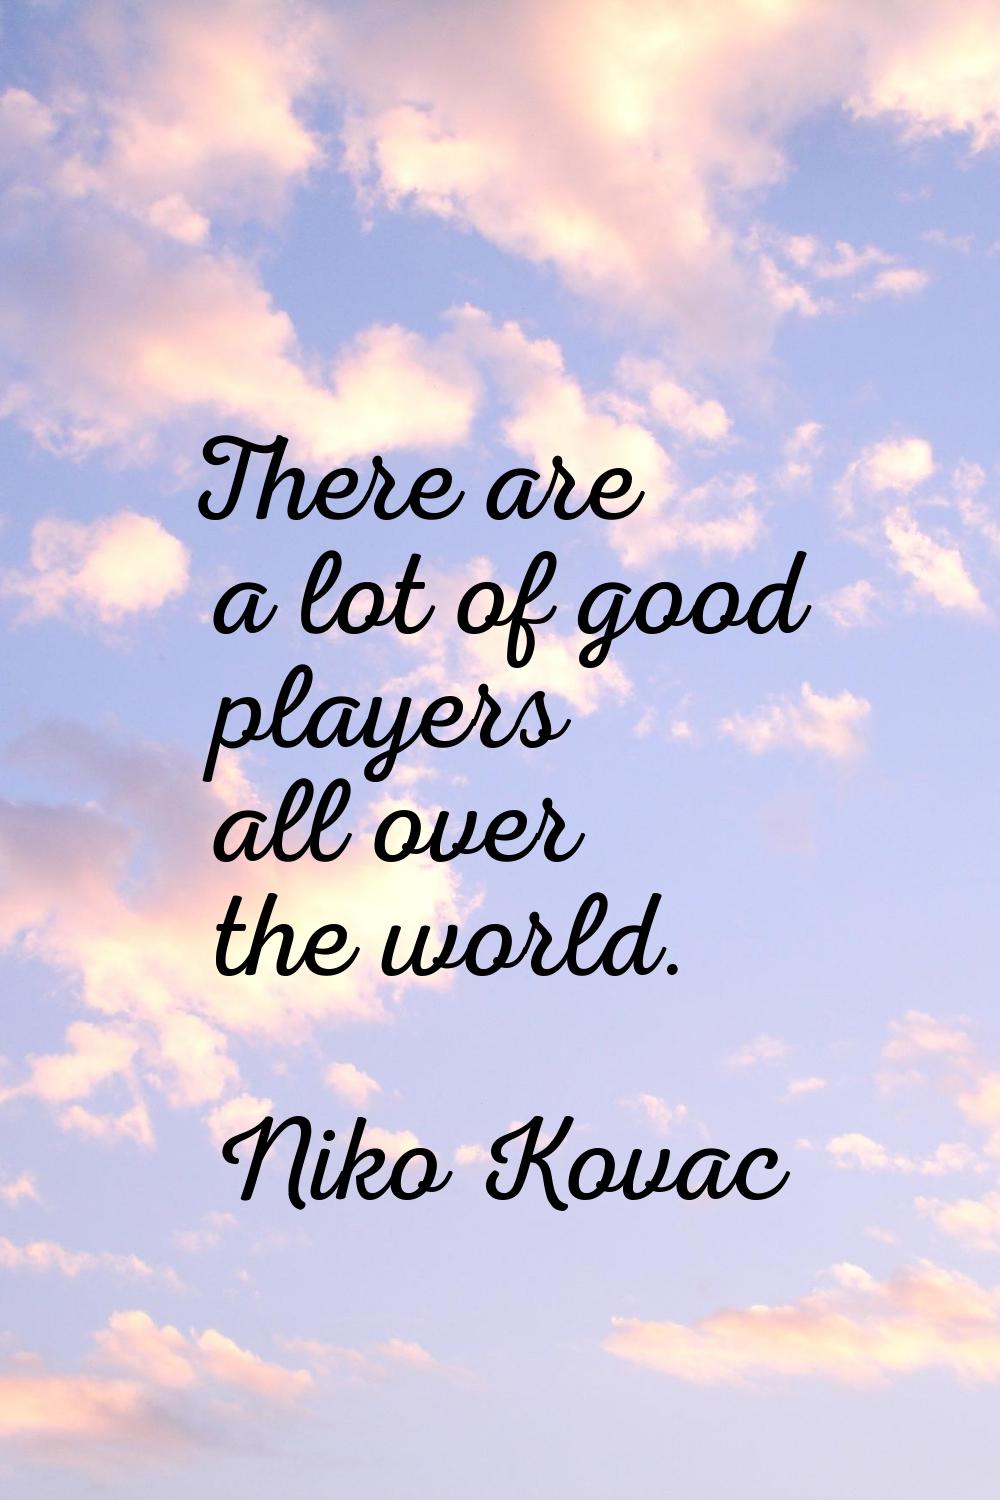 There are a lot of good players all over the world.